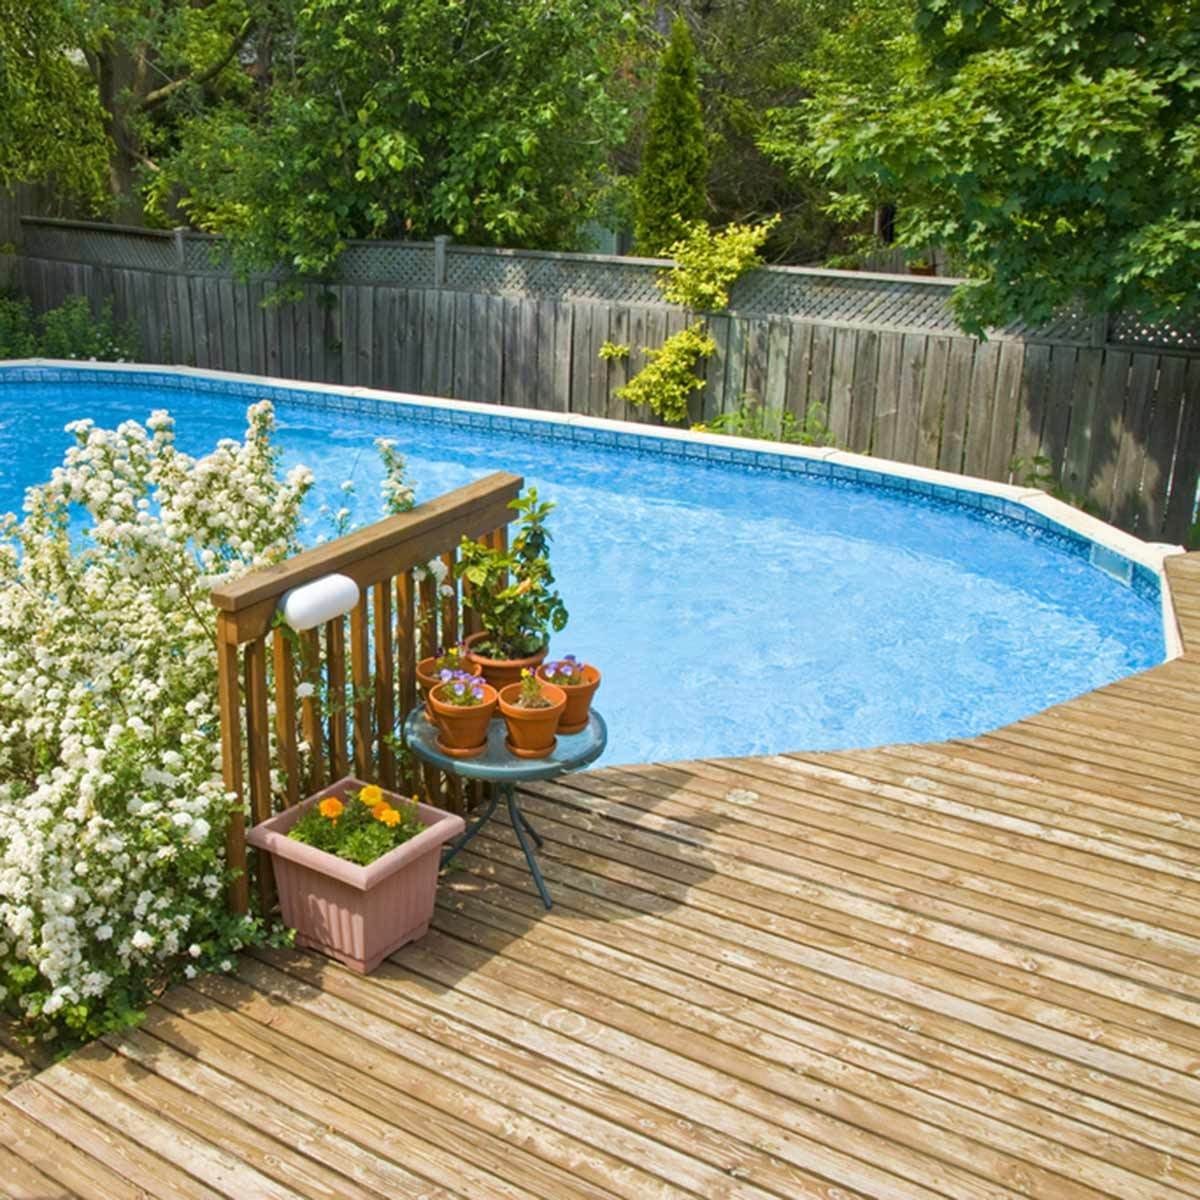 10 Best Backyard Pool Ideas and Designs (Images)